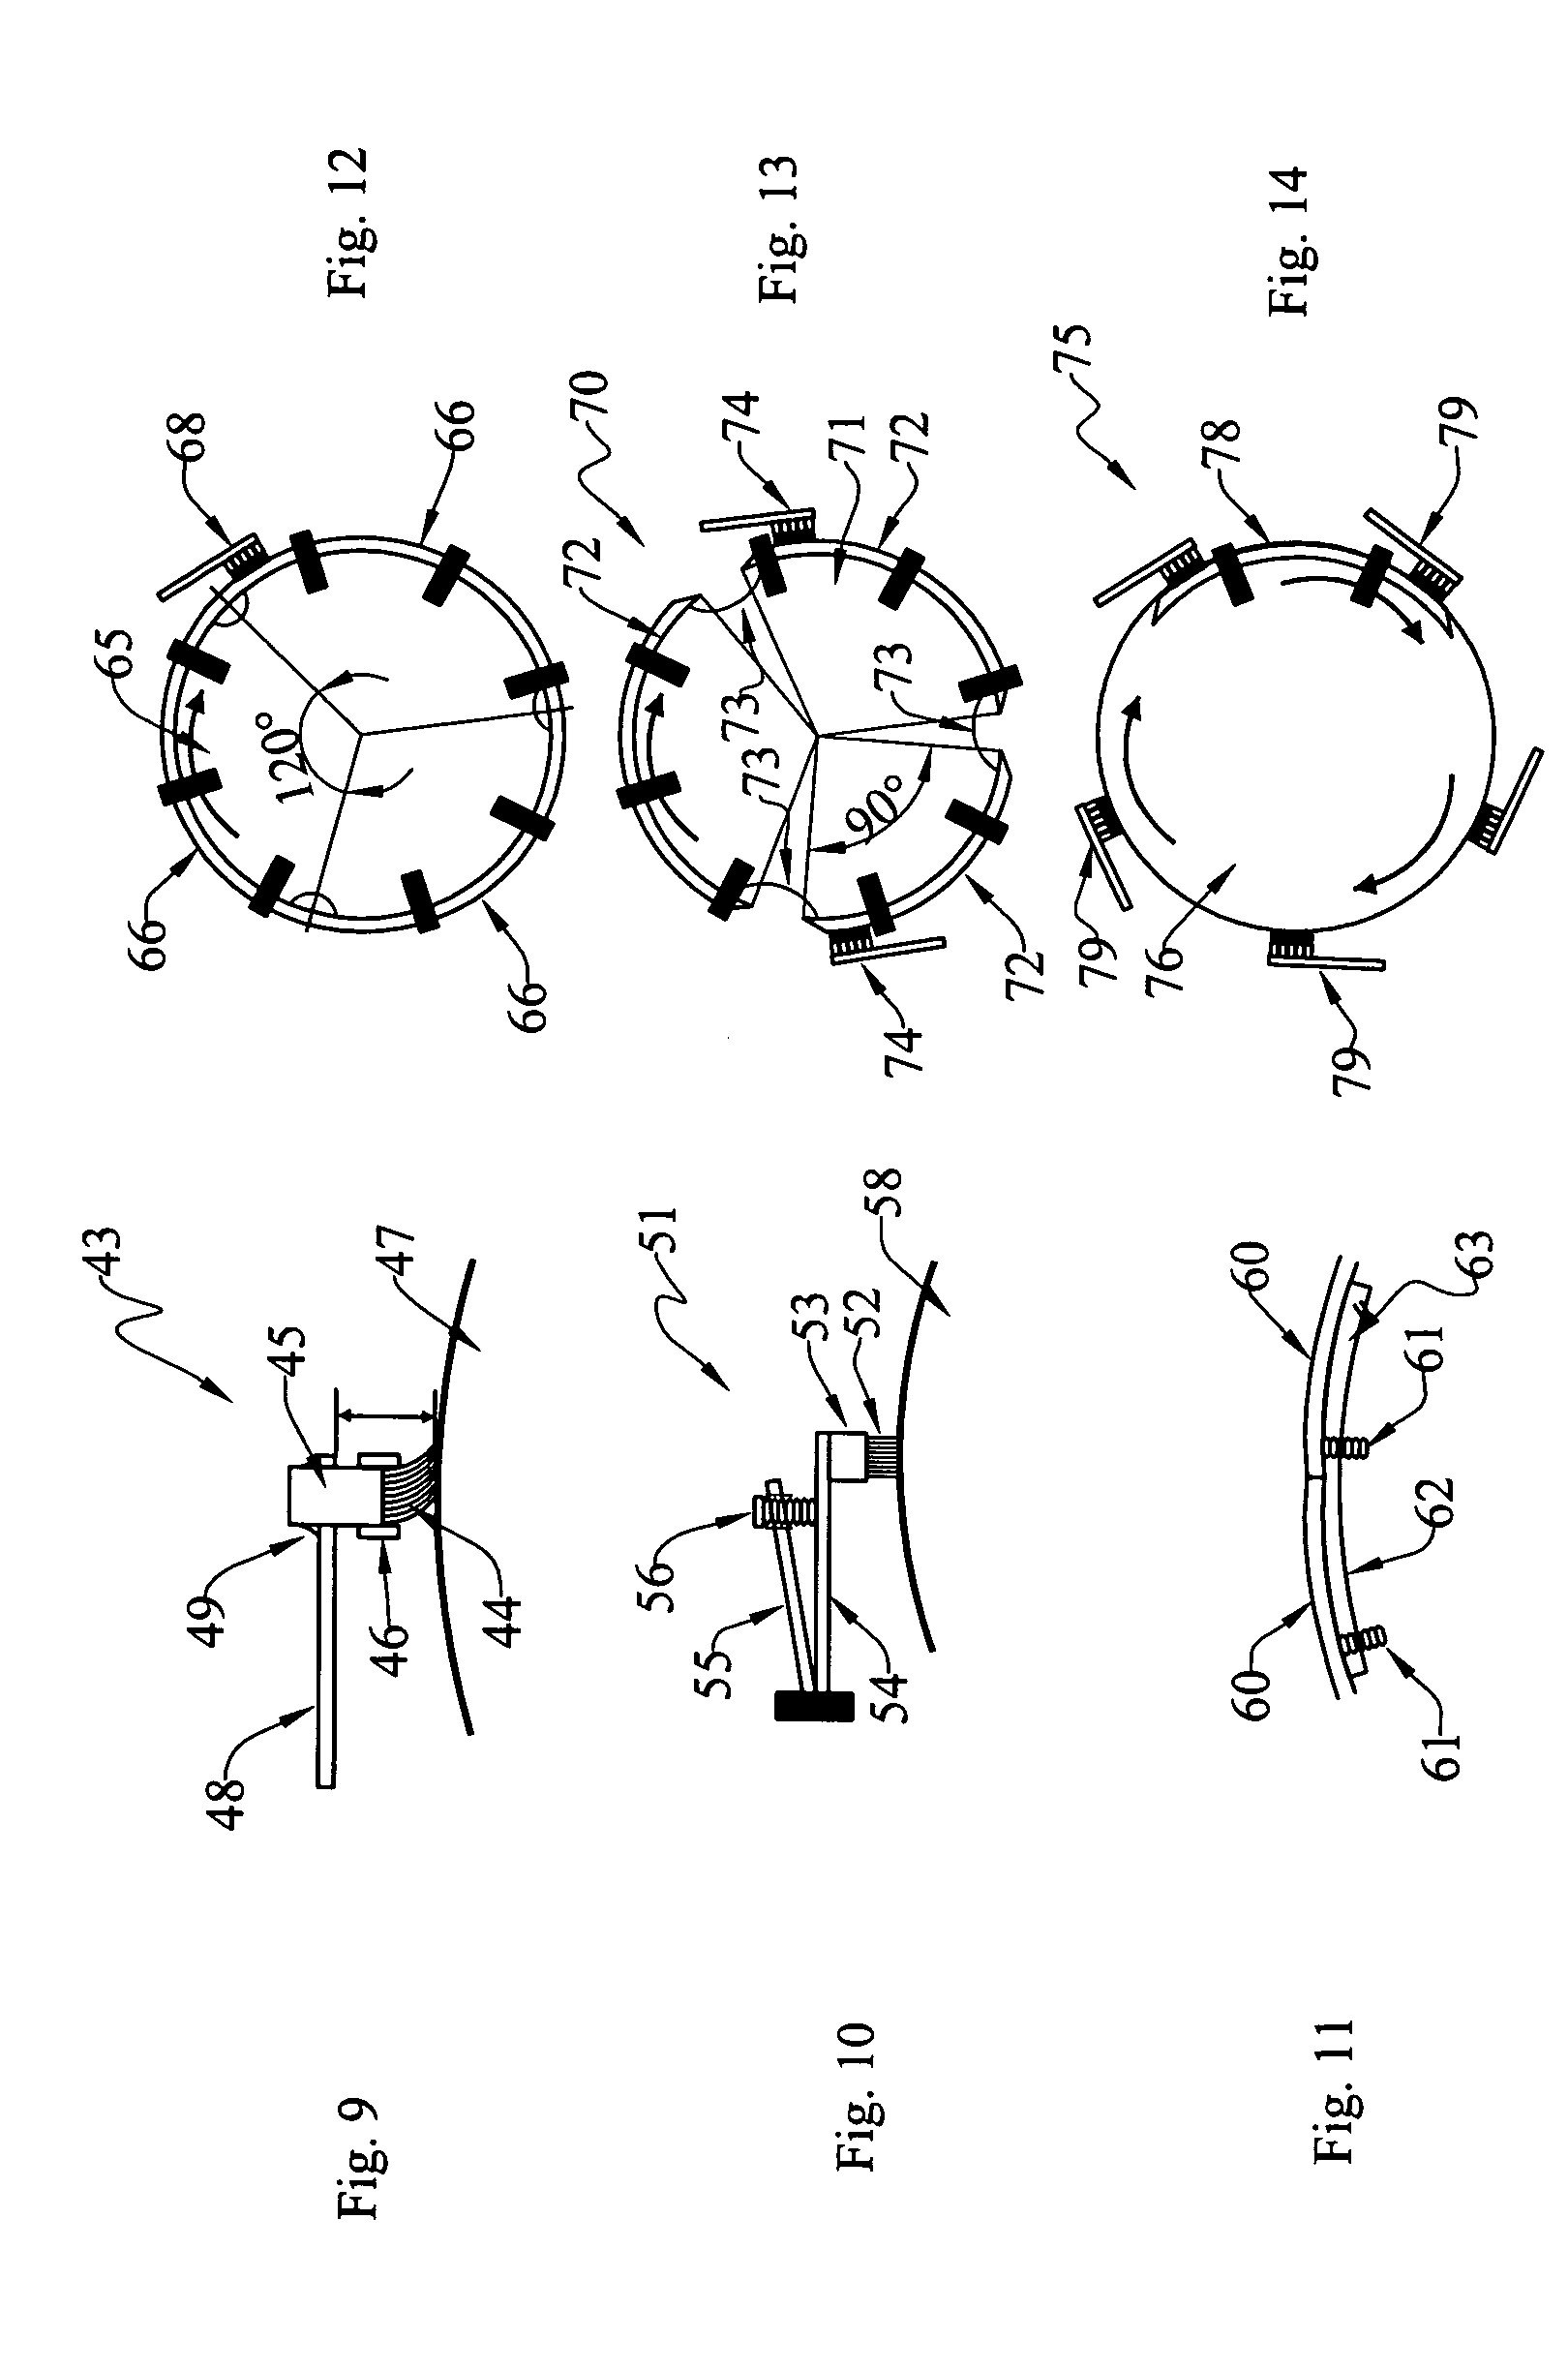 Electrical contact technology and methodology for the manufacture of large-diameter electrical slip rings